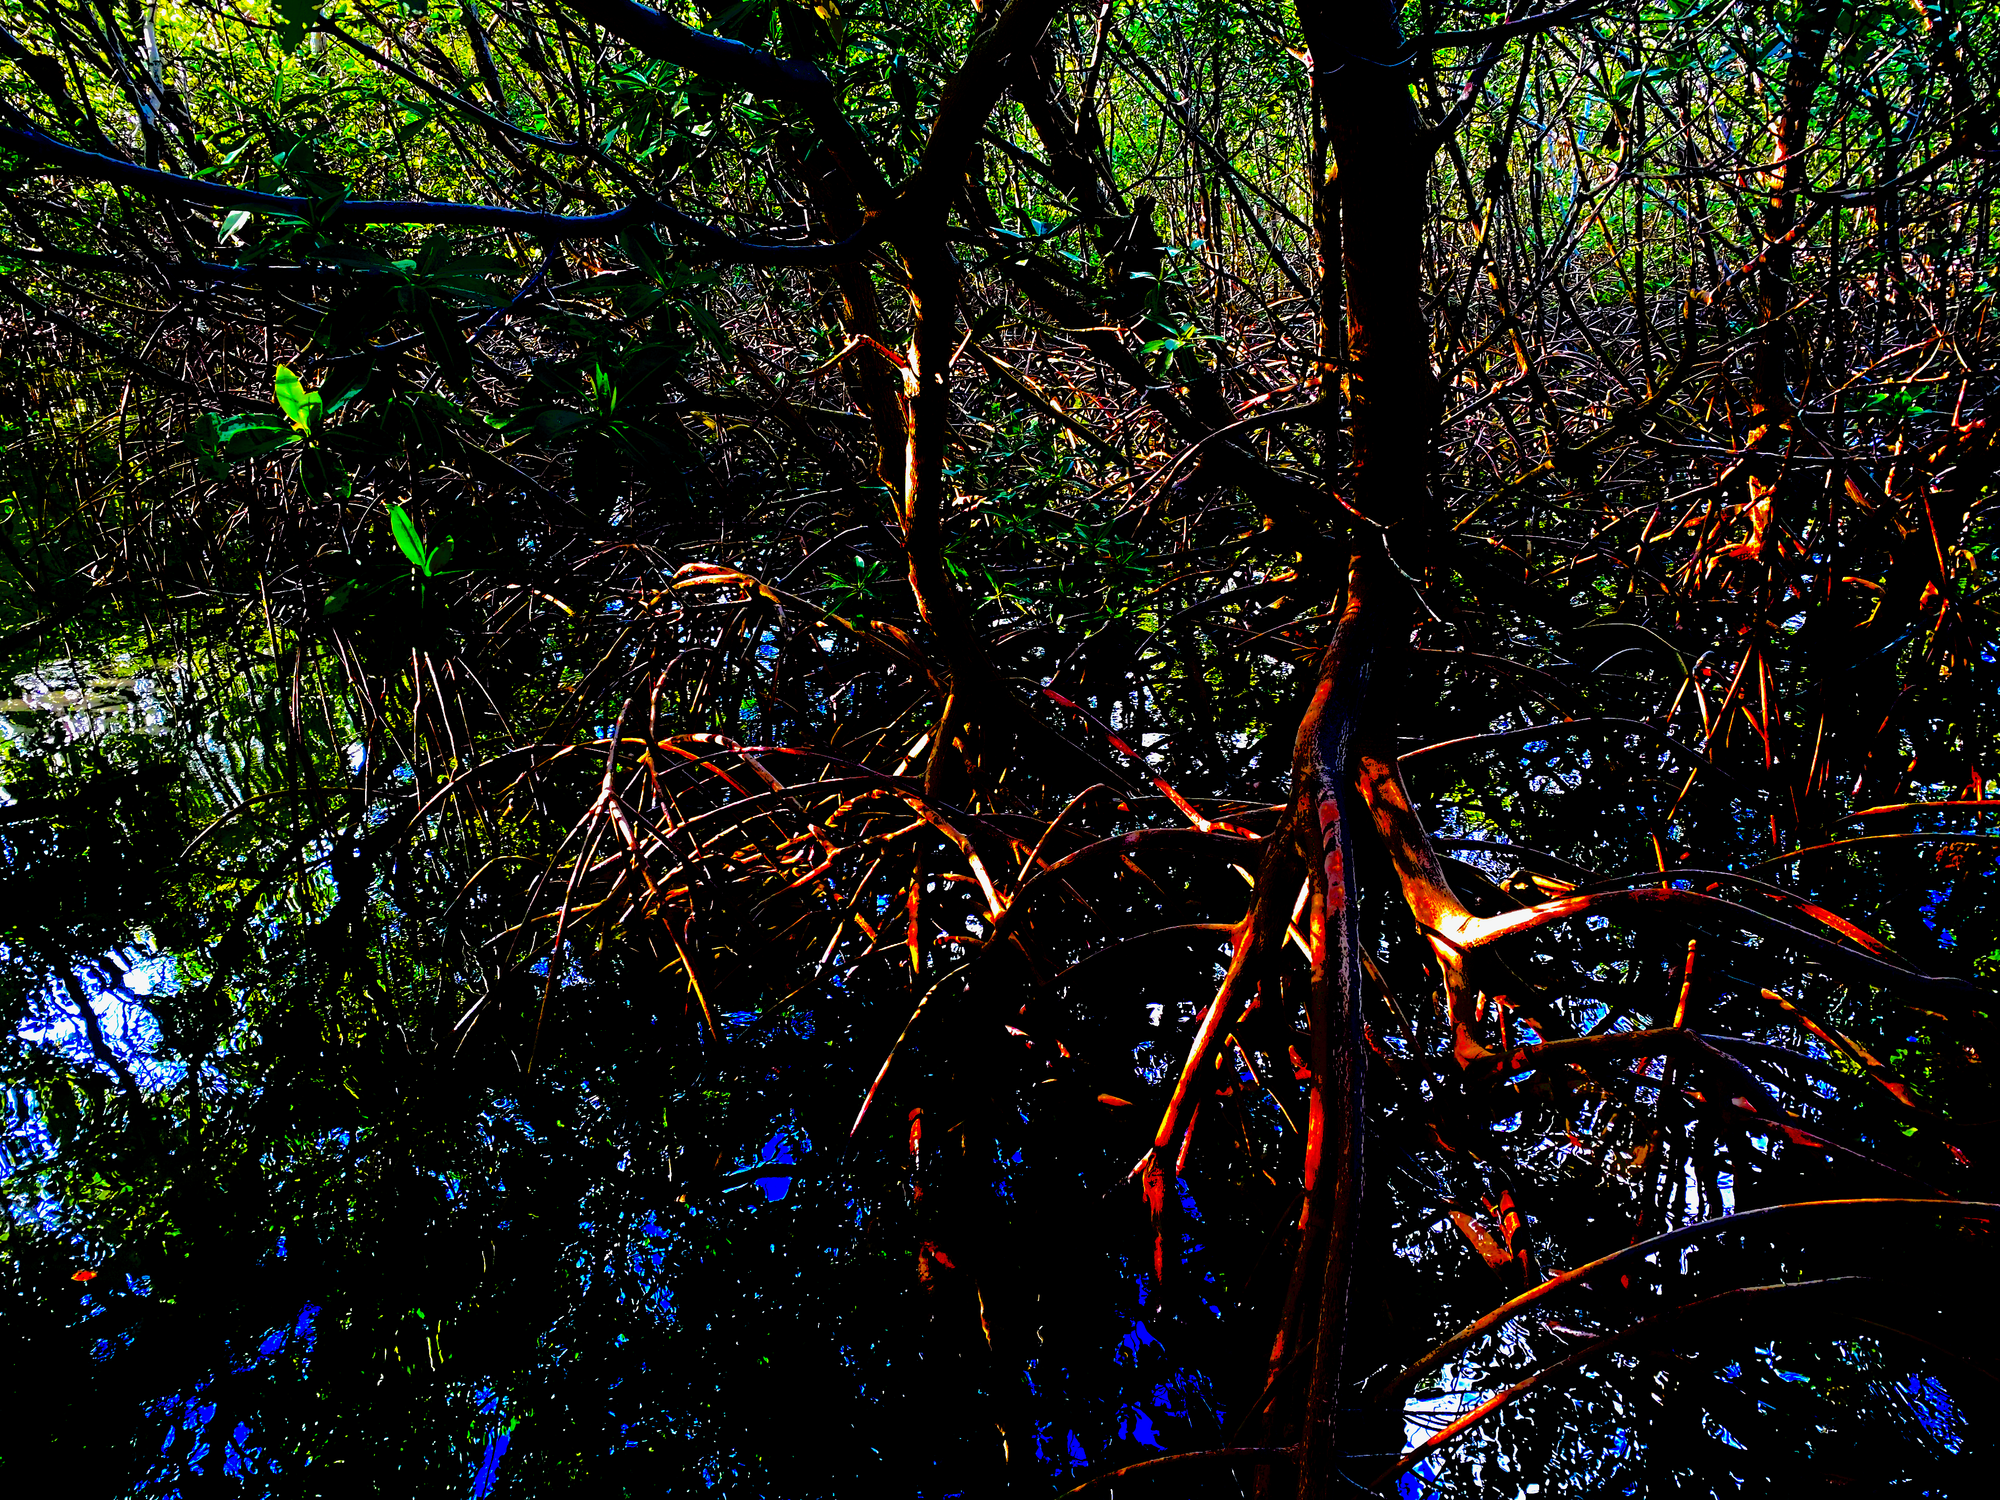 Exposed roots of a mangrove wetland in South Florida. Green, red, and blue colors have been enhanced.